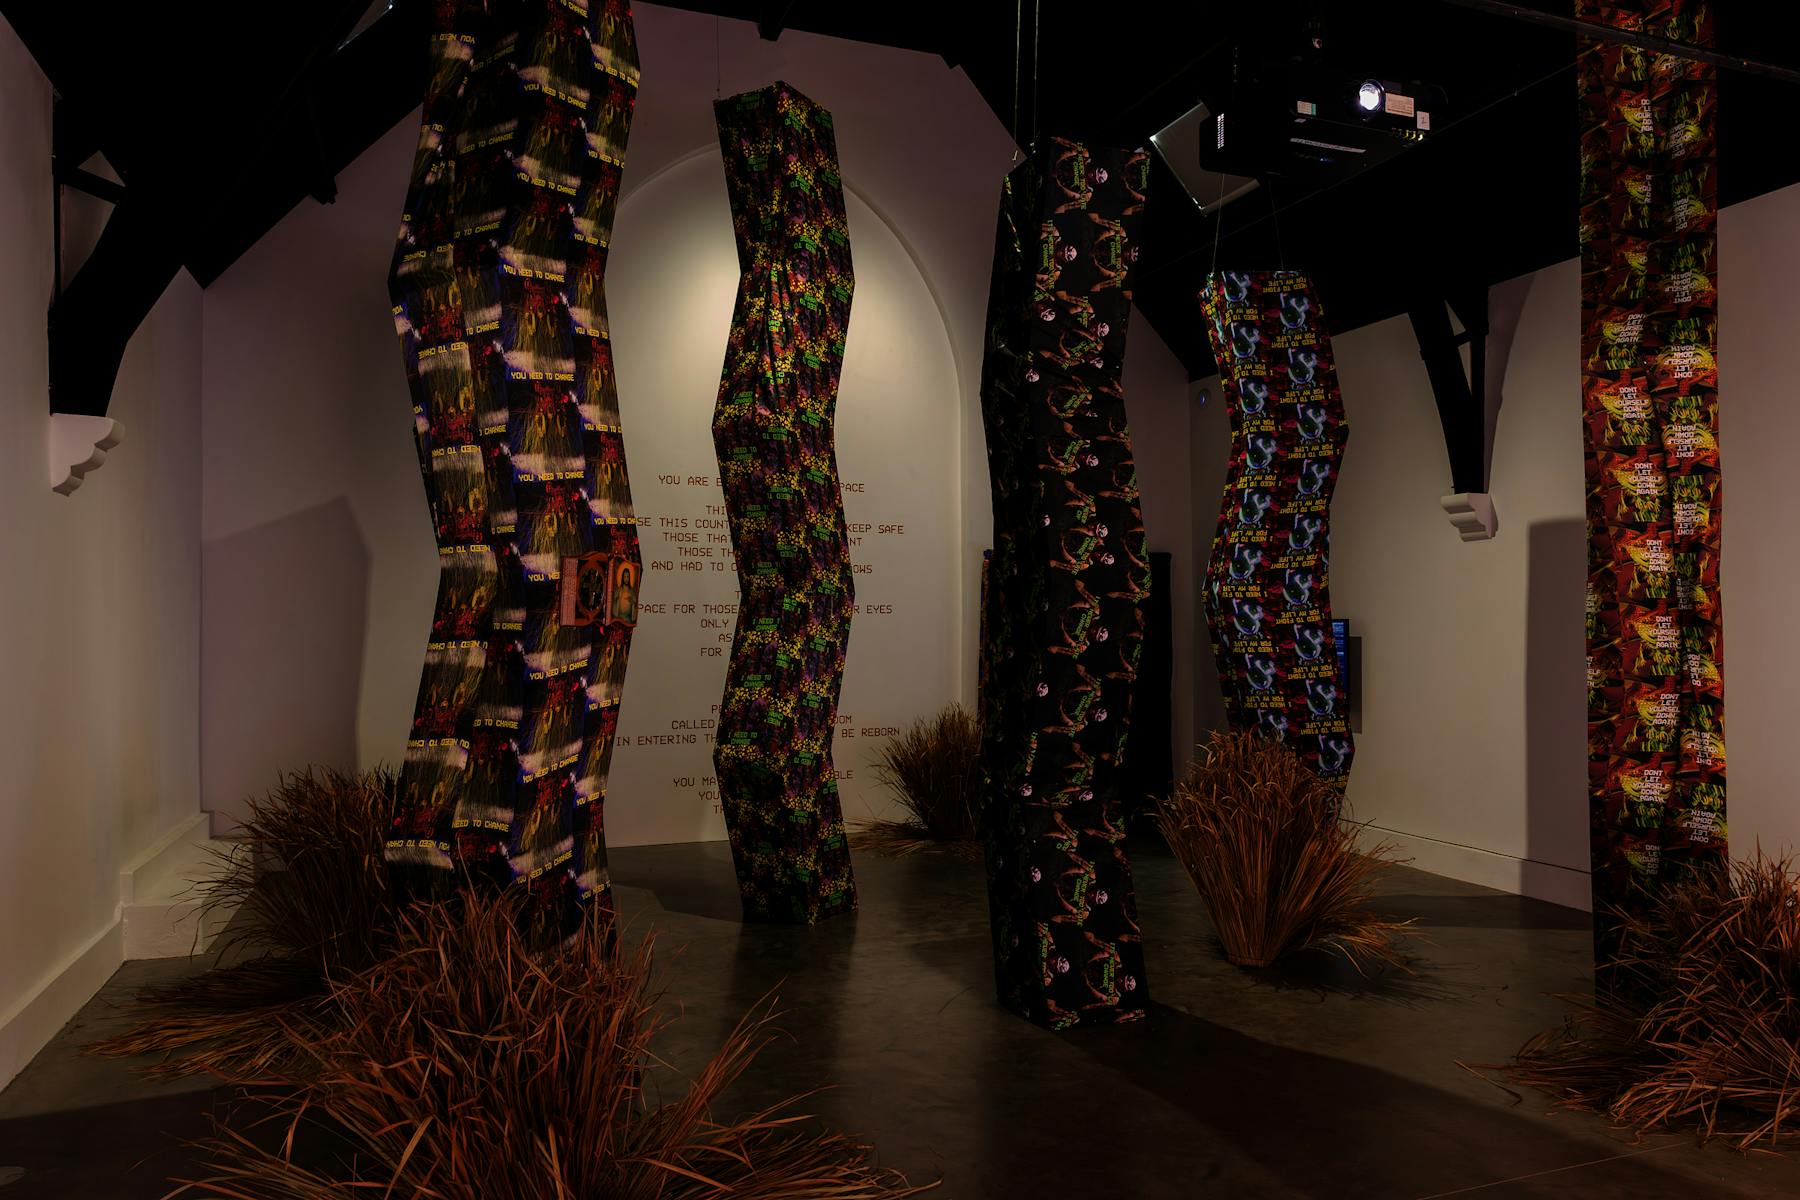 A photograph of a dimly lit room, that is filled with tall angular structures that reach from the floor to the ceiling. The structures are wrapped in vibrantly patterned fabrics. a wall in the background is downlit and features a set of instructions in red letters.